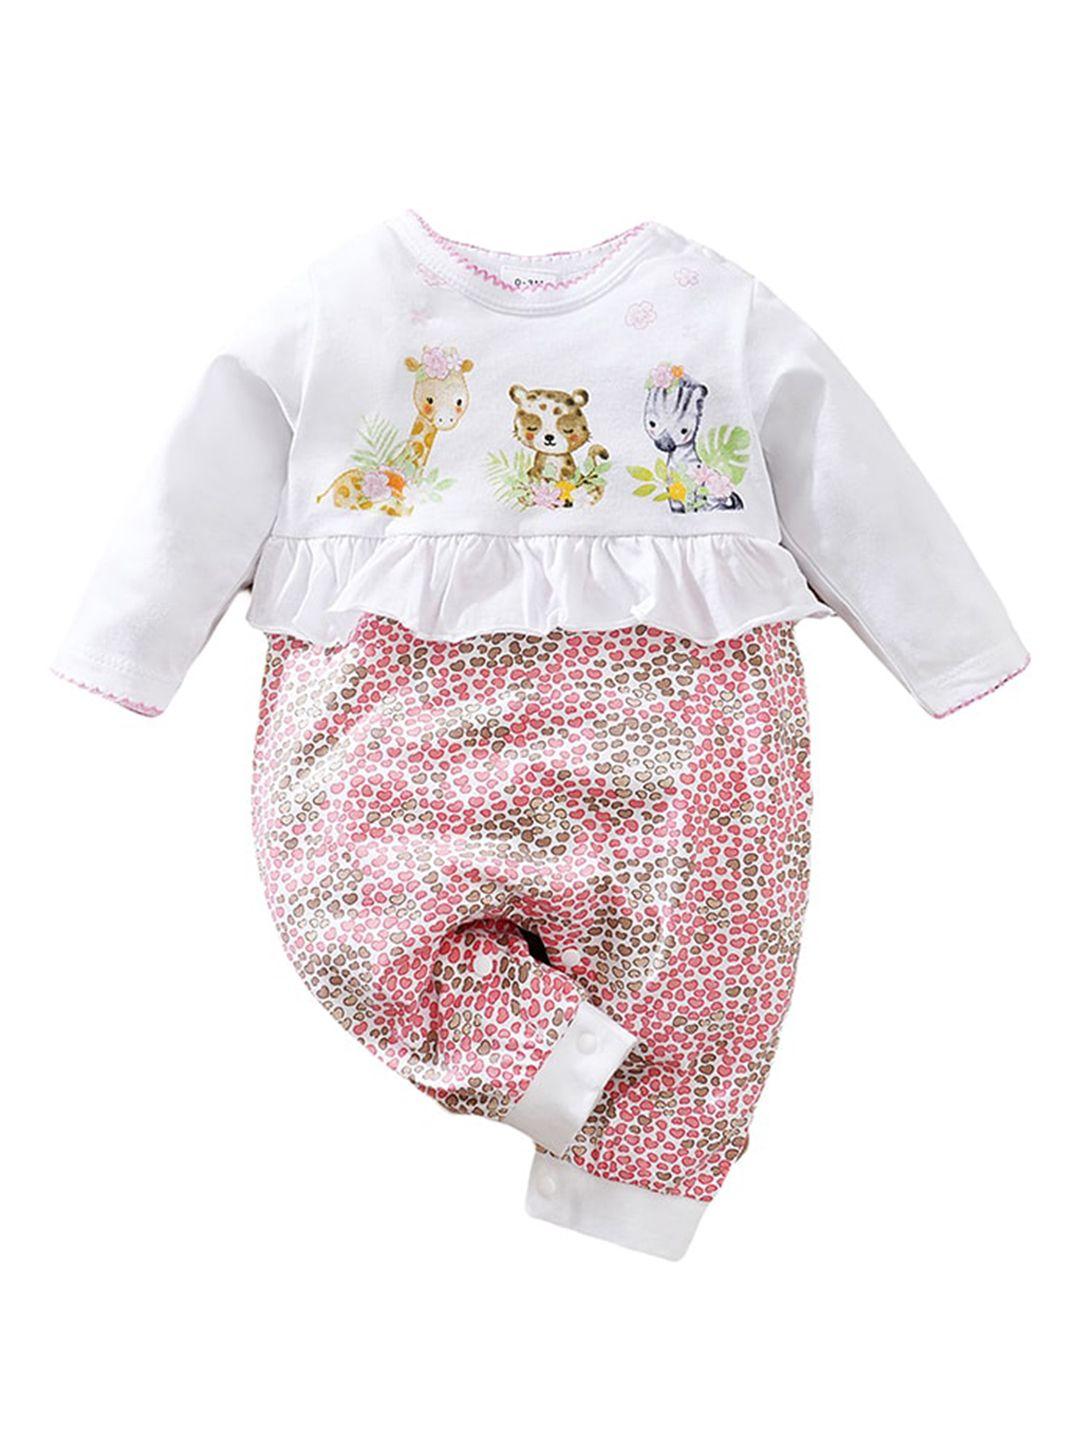 stylecast infant girls white graphic printed pure cotton rompers